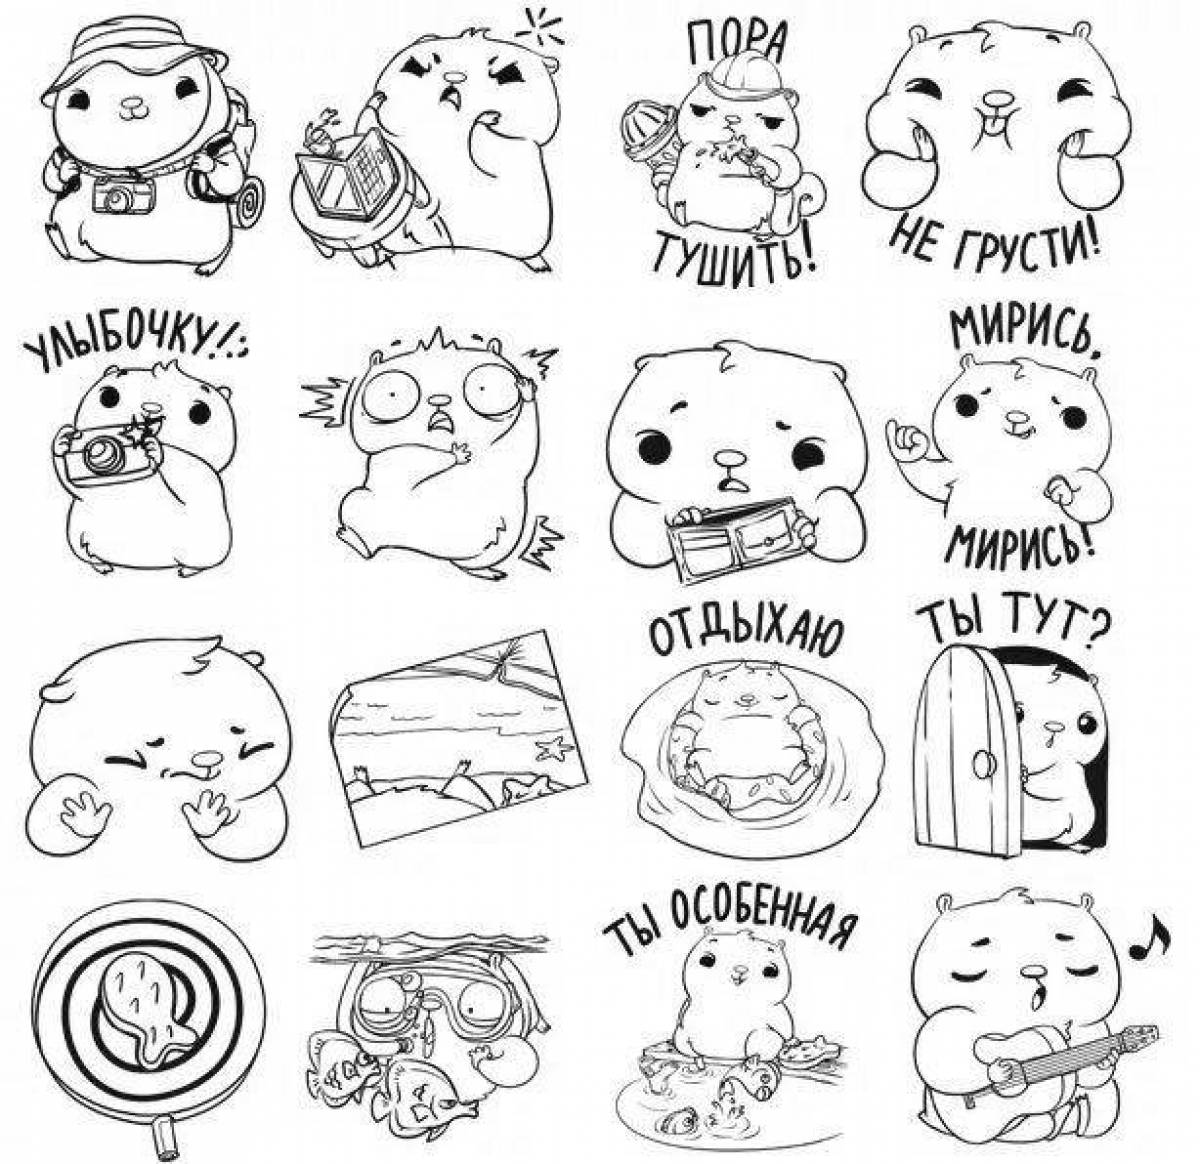 Charming coloring cute stickers